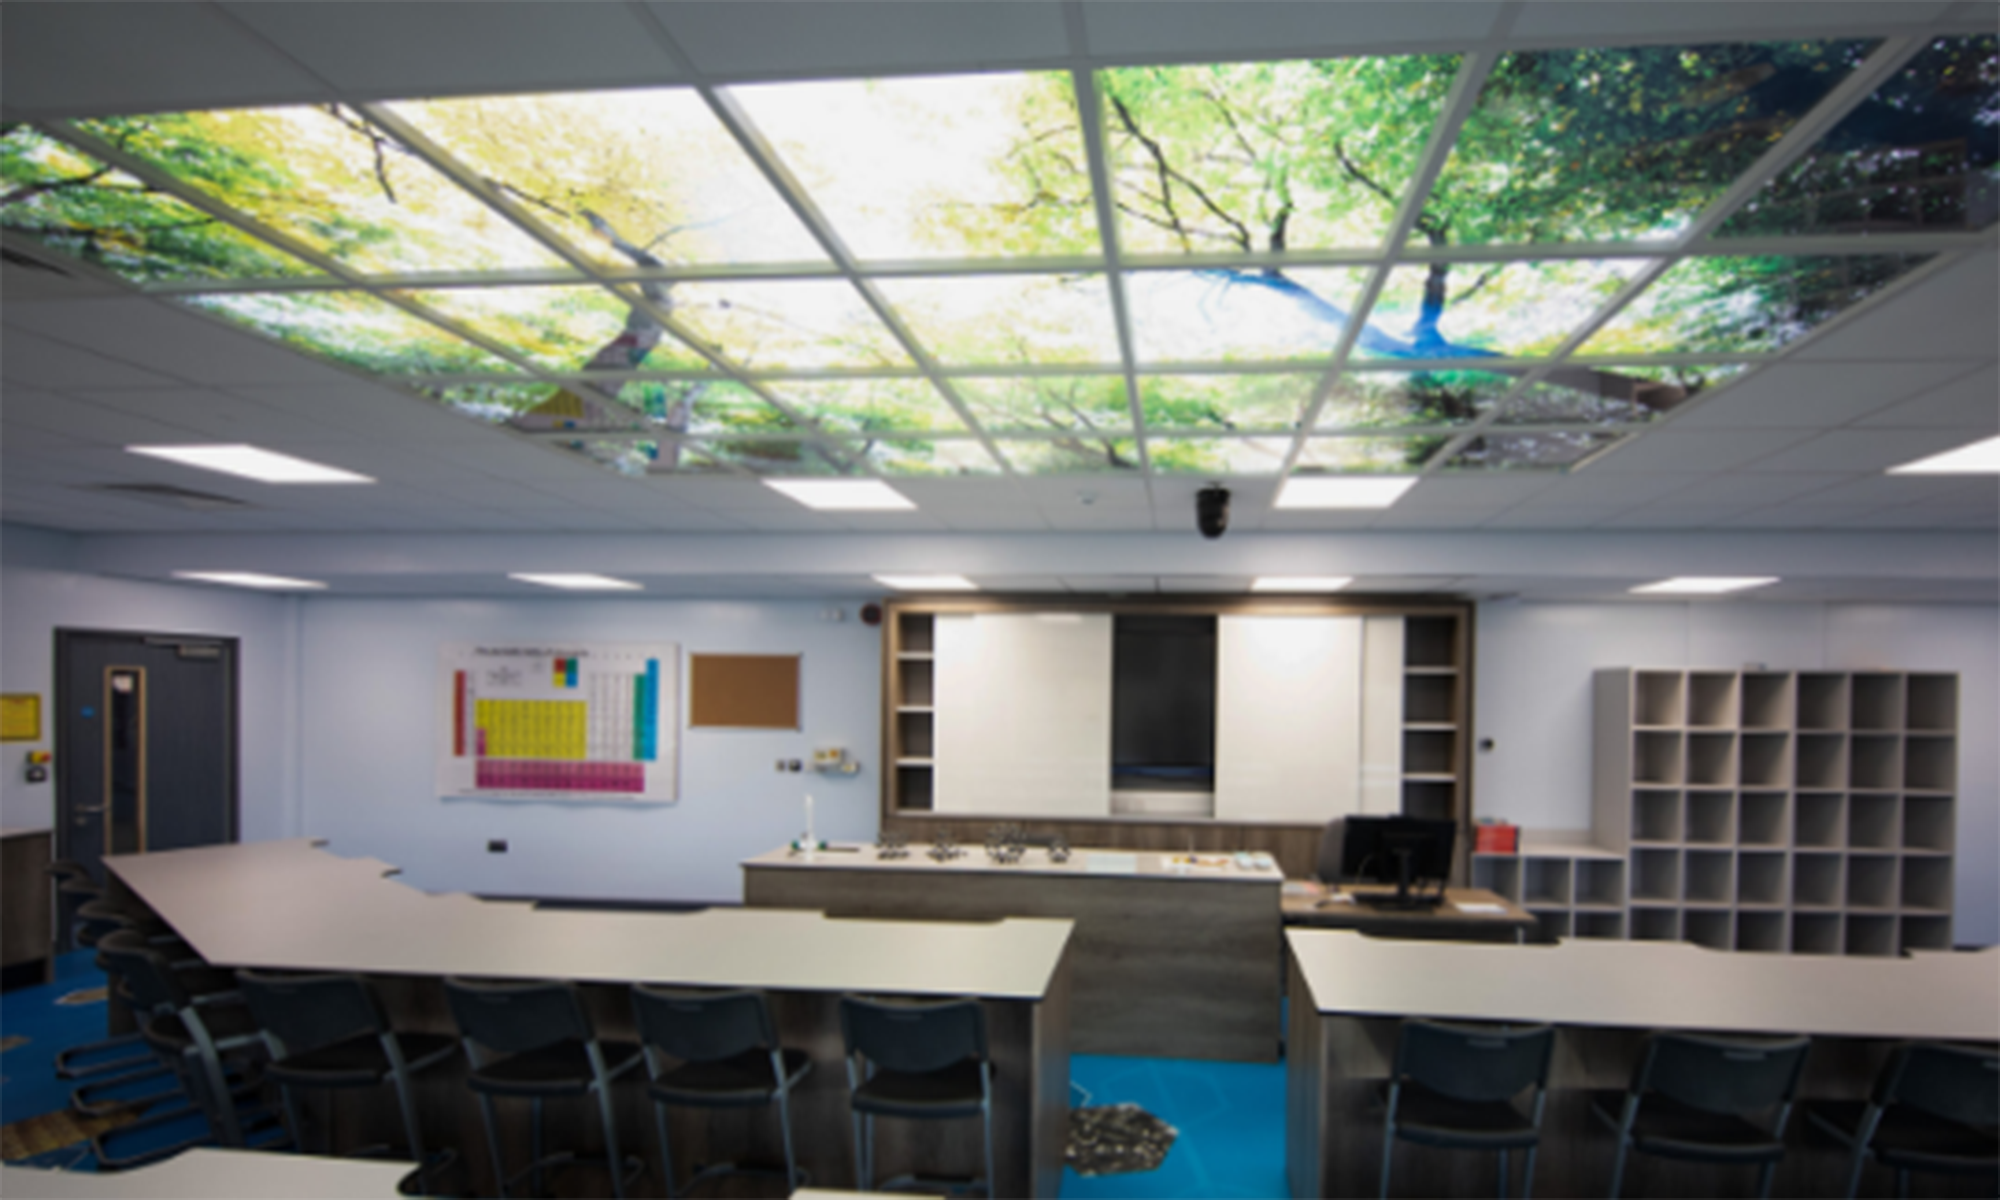 LED Sky panels in a large classroom